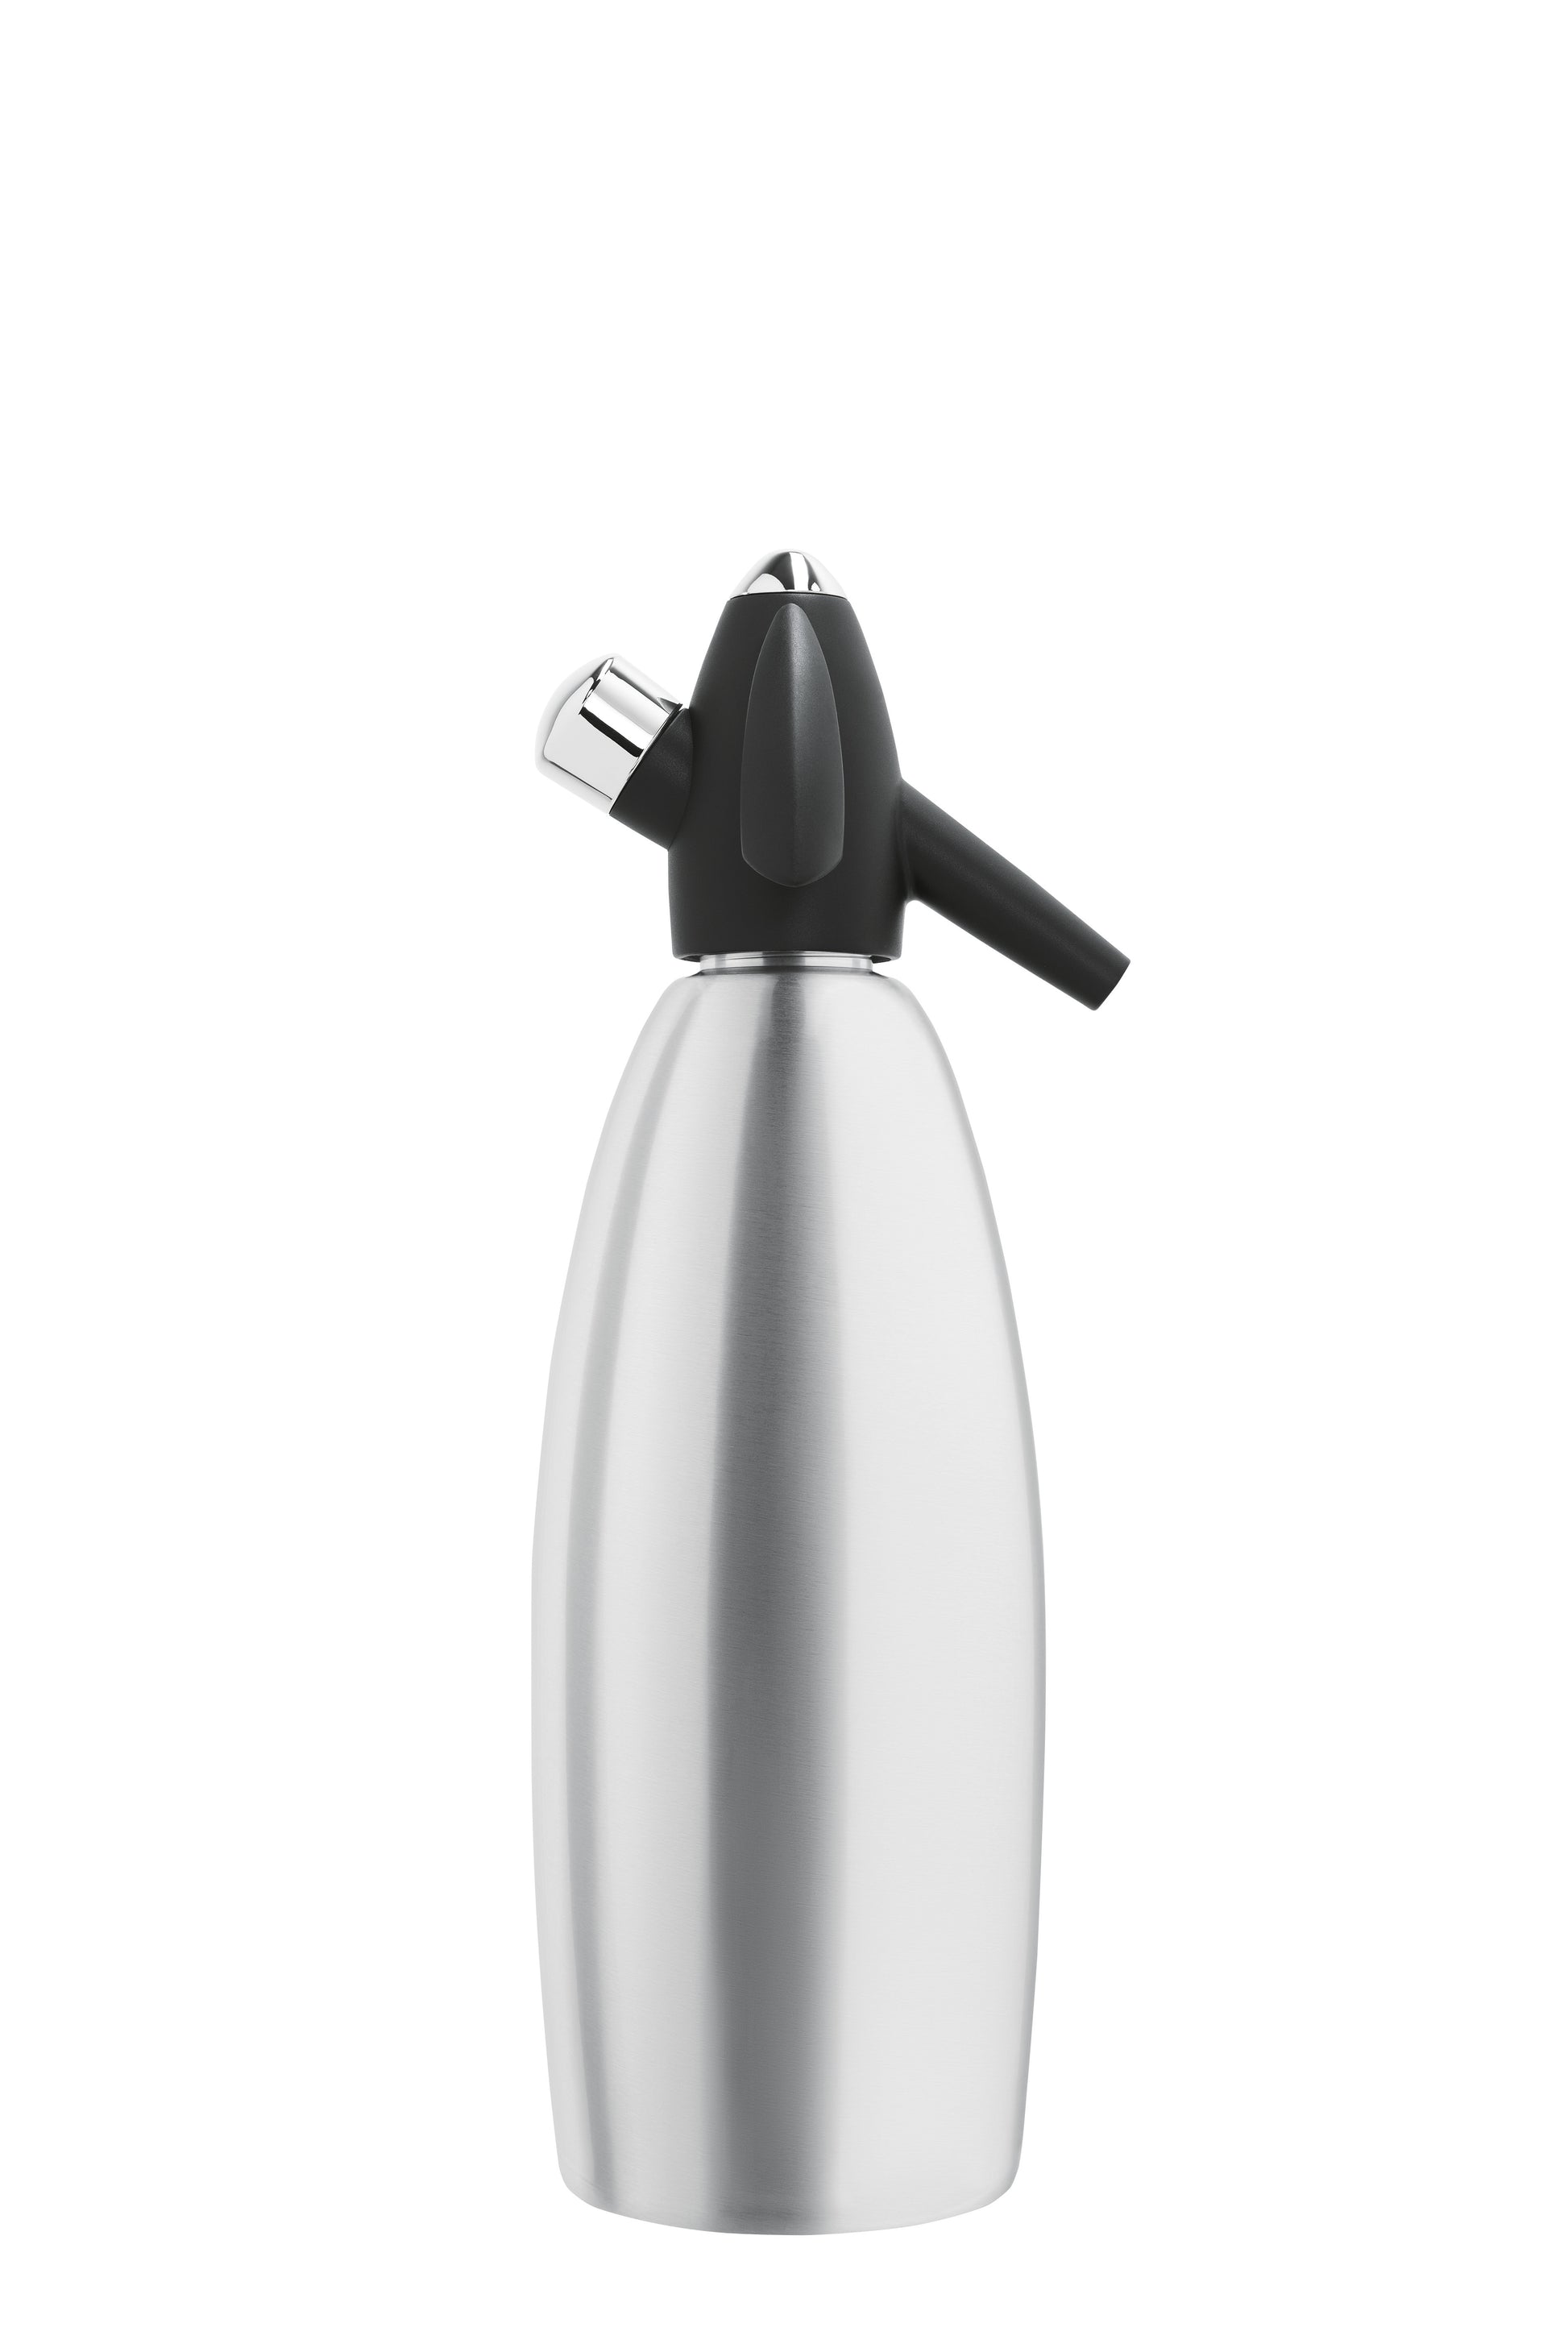 Stainless Steel Soda Syphon 